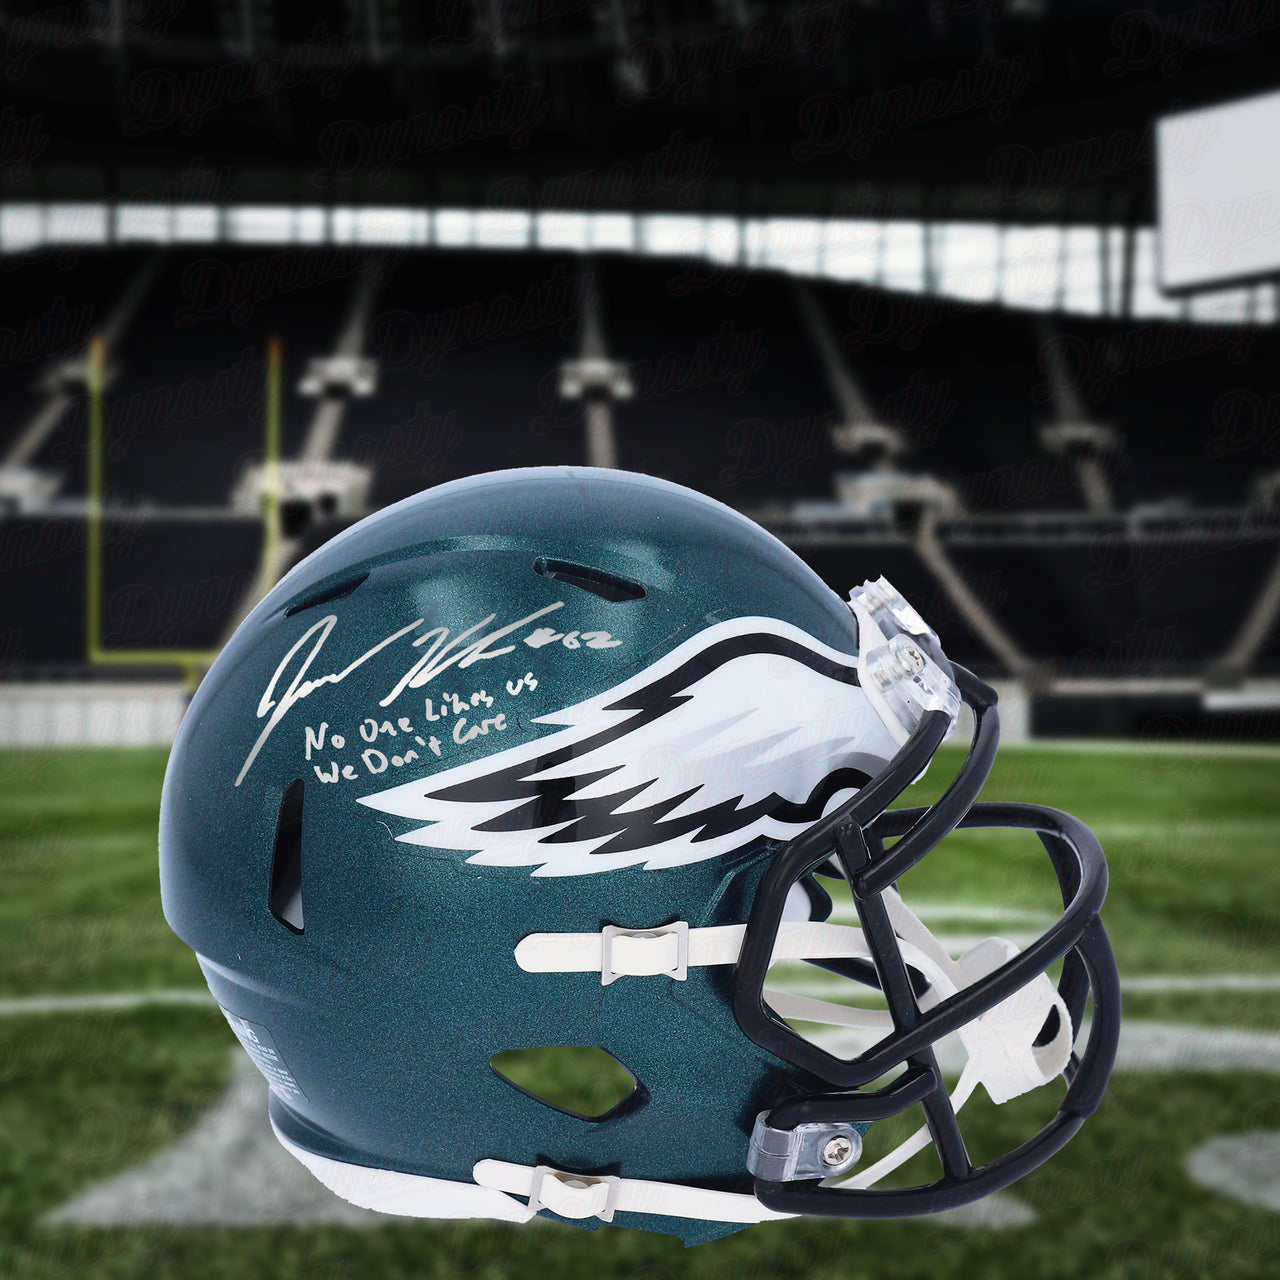 Jason Kelce Philadelphia Eagles Autographed Full-Size Helmet Inscribed No One Likes Us We Don't Care - Dynasty Sports & Framing 